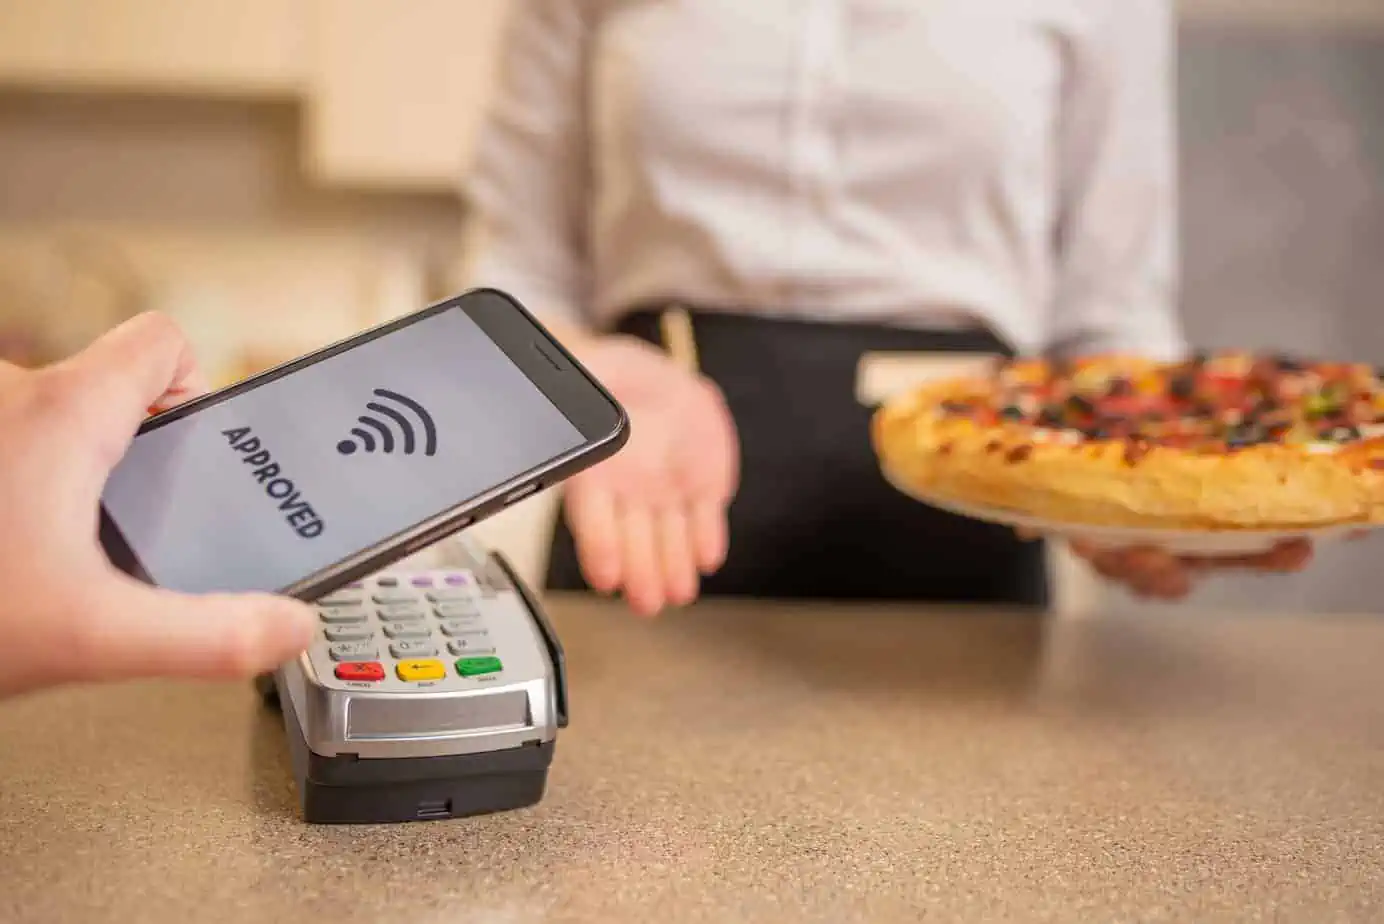 payment by contactless payment for pizza in a restaurant or cafe cashless payments banking services a new life according to the 190394627